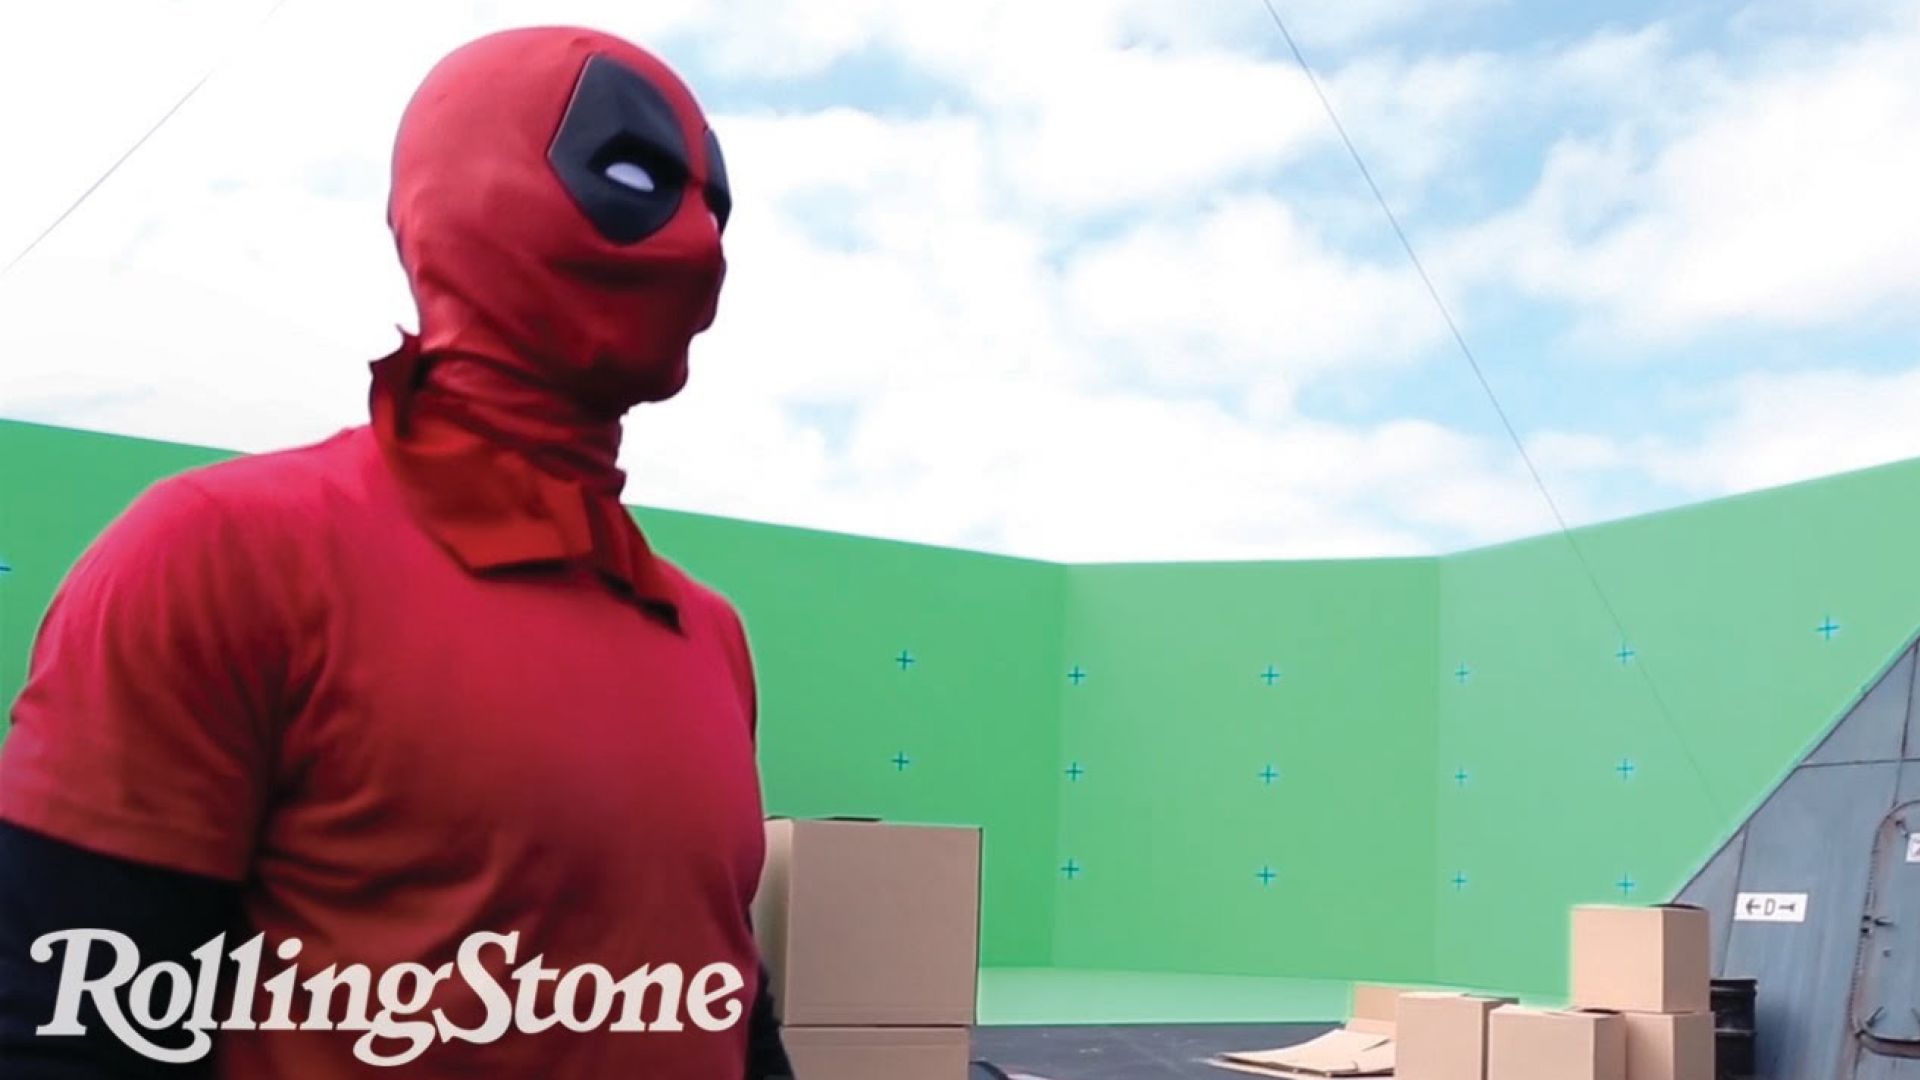 Get Behind the Scenes on the Fight Sequences of Deadpool